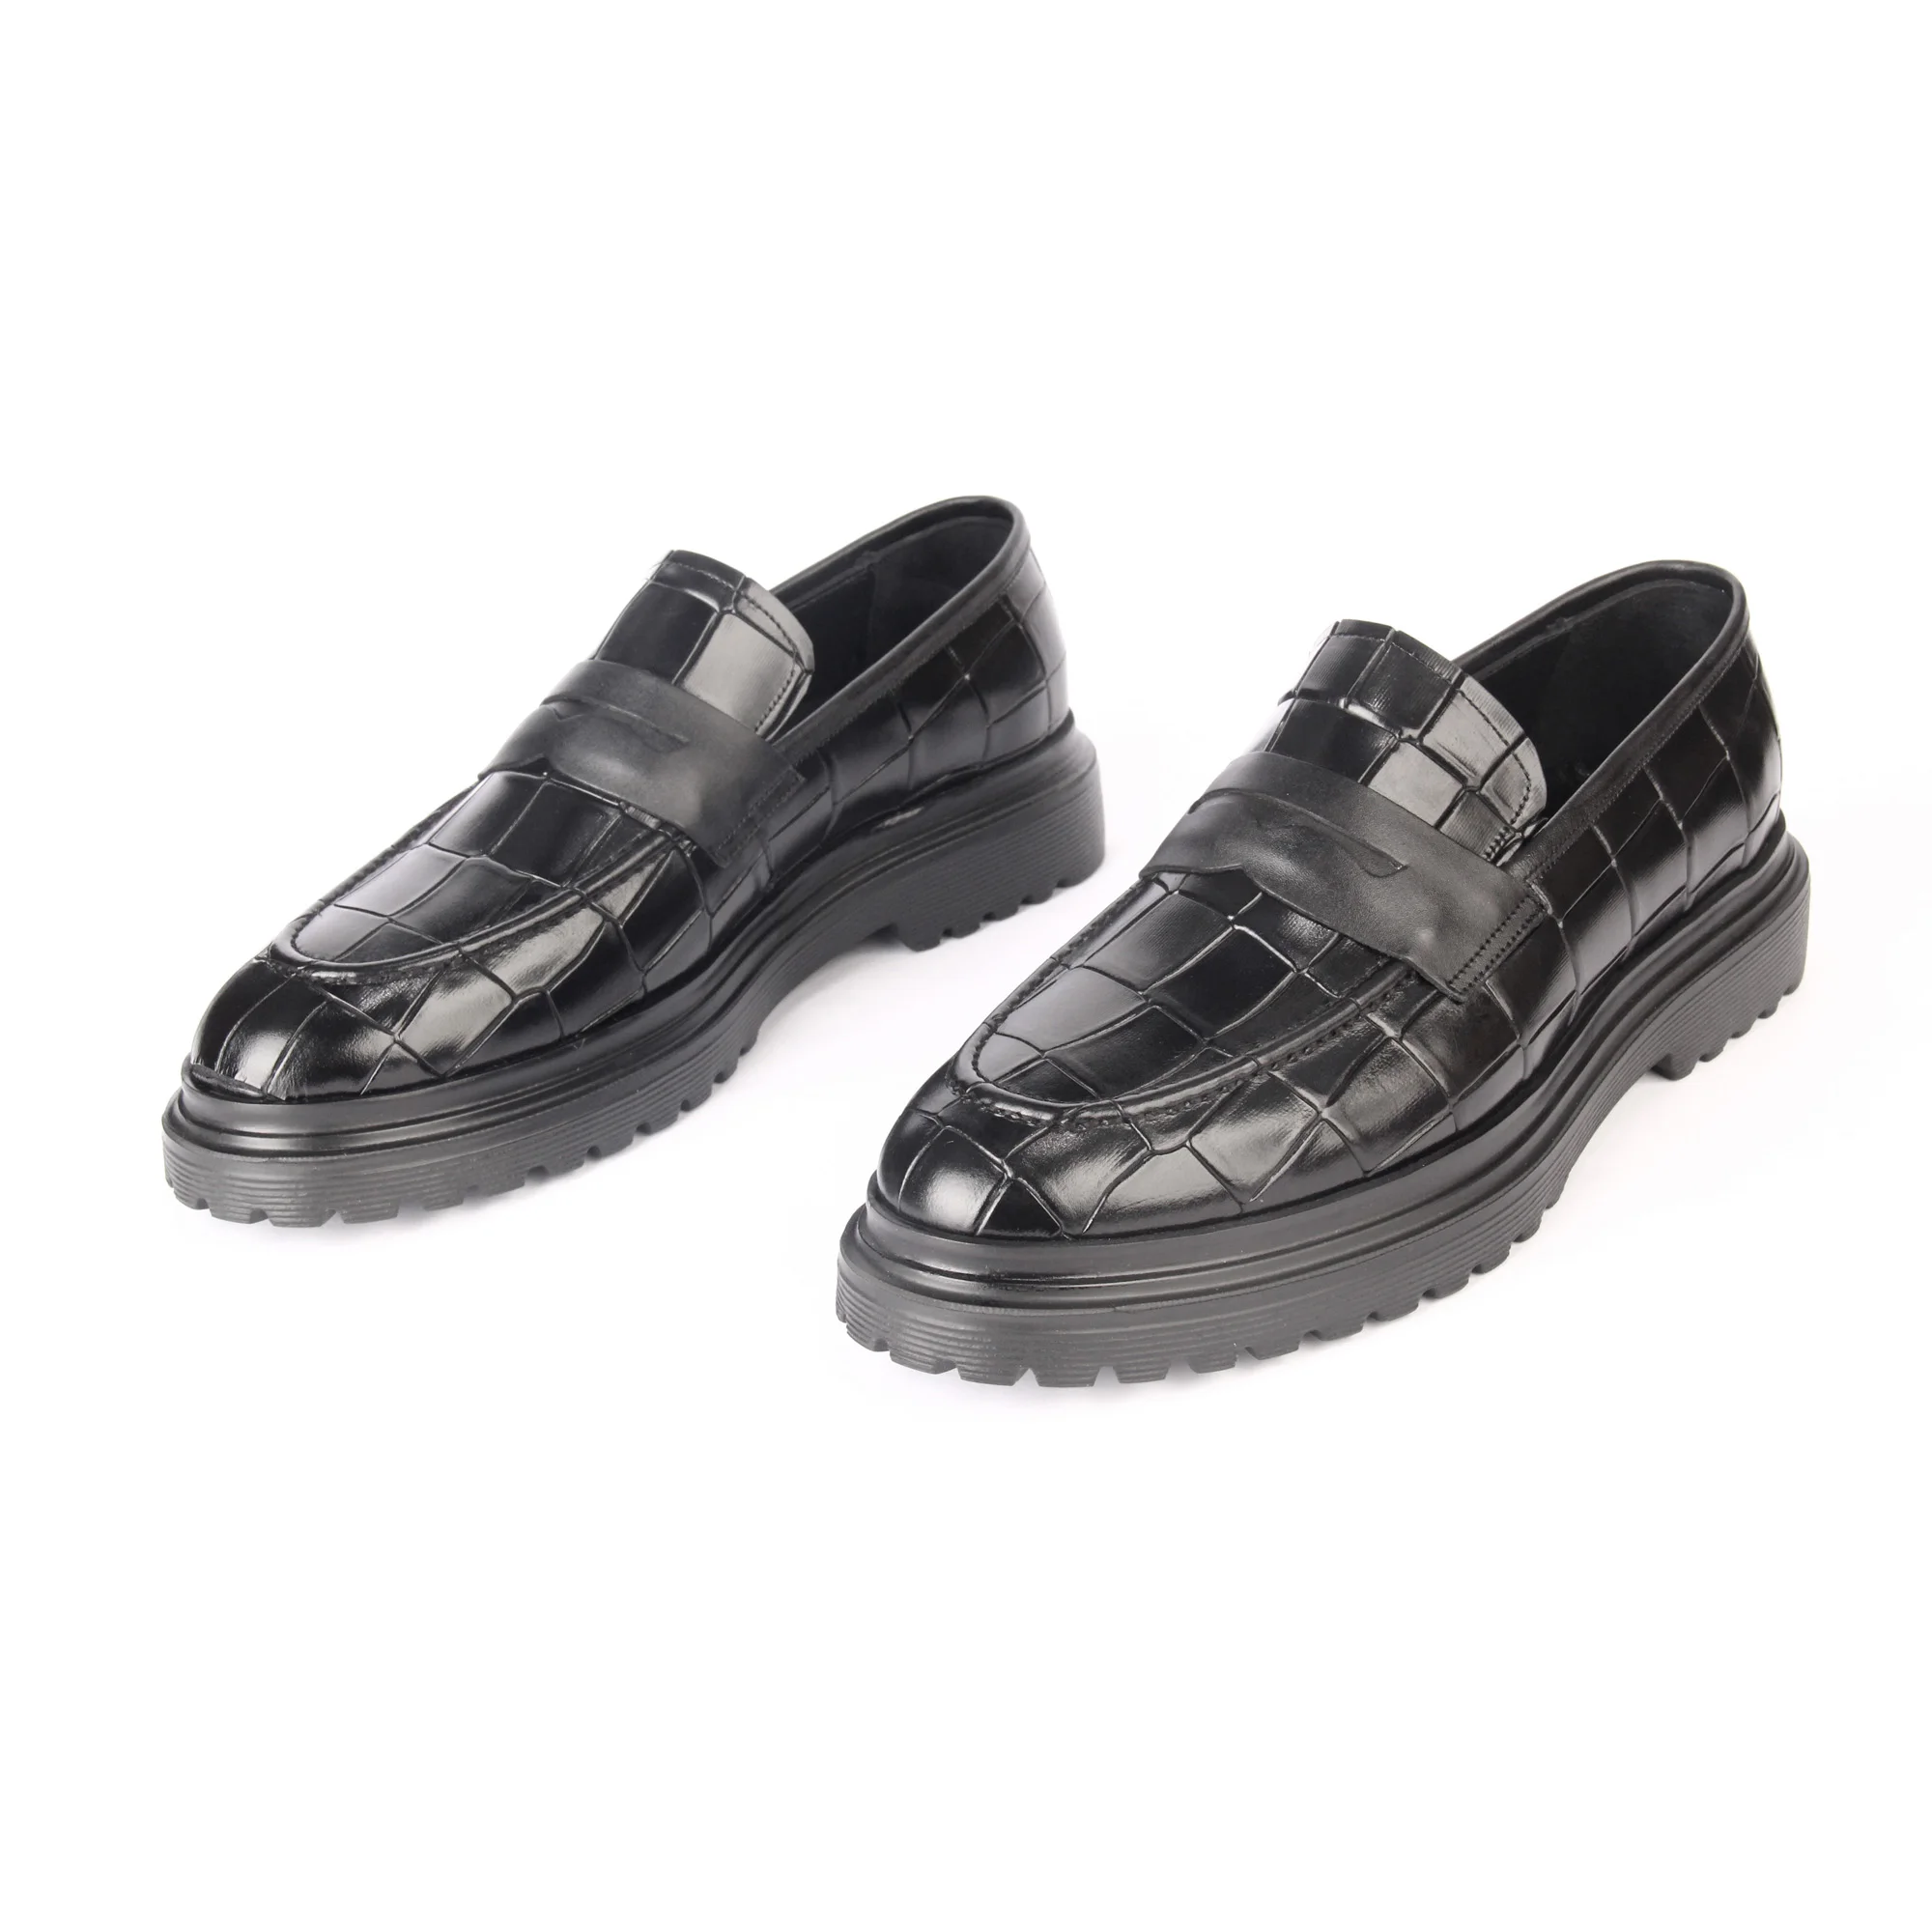 

Handmade Black Penny Loafers, Height Increasing EVA Sole, Croco Alligator Imitation Embossed Calf Leather, Men's Casual Shoes